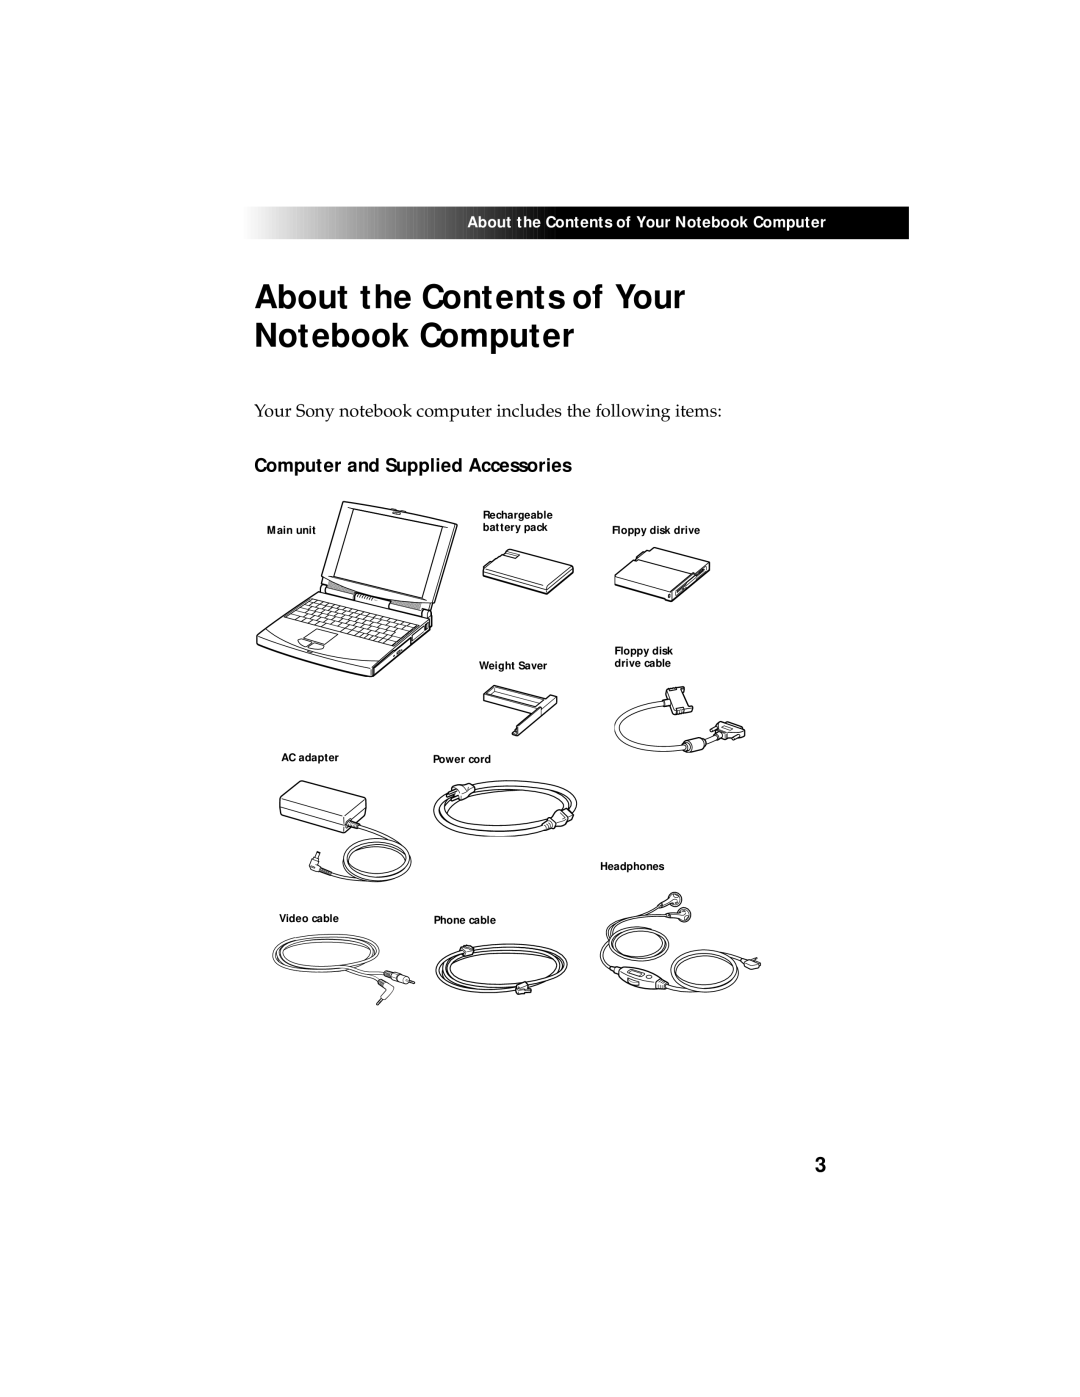 Sony 707C manual About the Contents of Your Notebook Computer, Computer and Supplied Accessories, Rechargeable, Main unit 